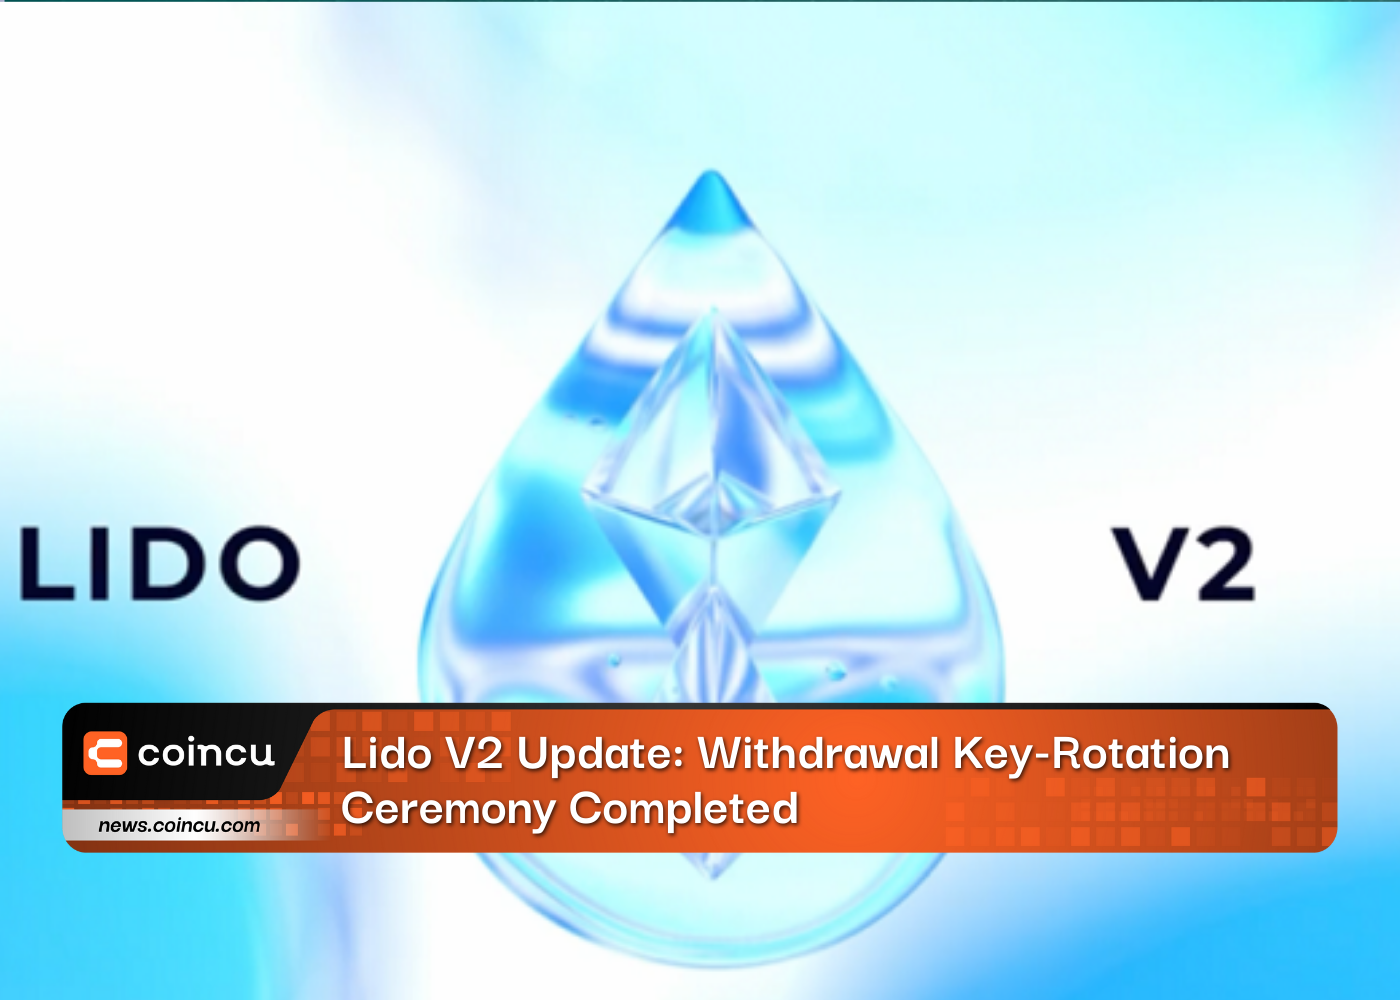 Lido V2 Update: Withdrawal Key-Rotation Ceremony Completed